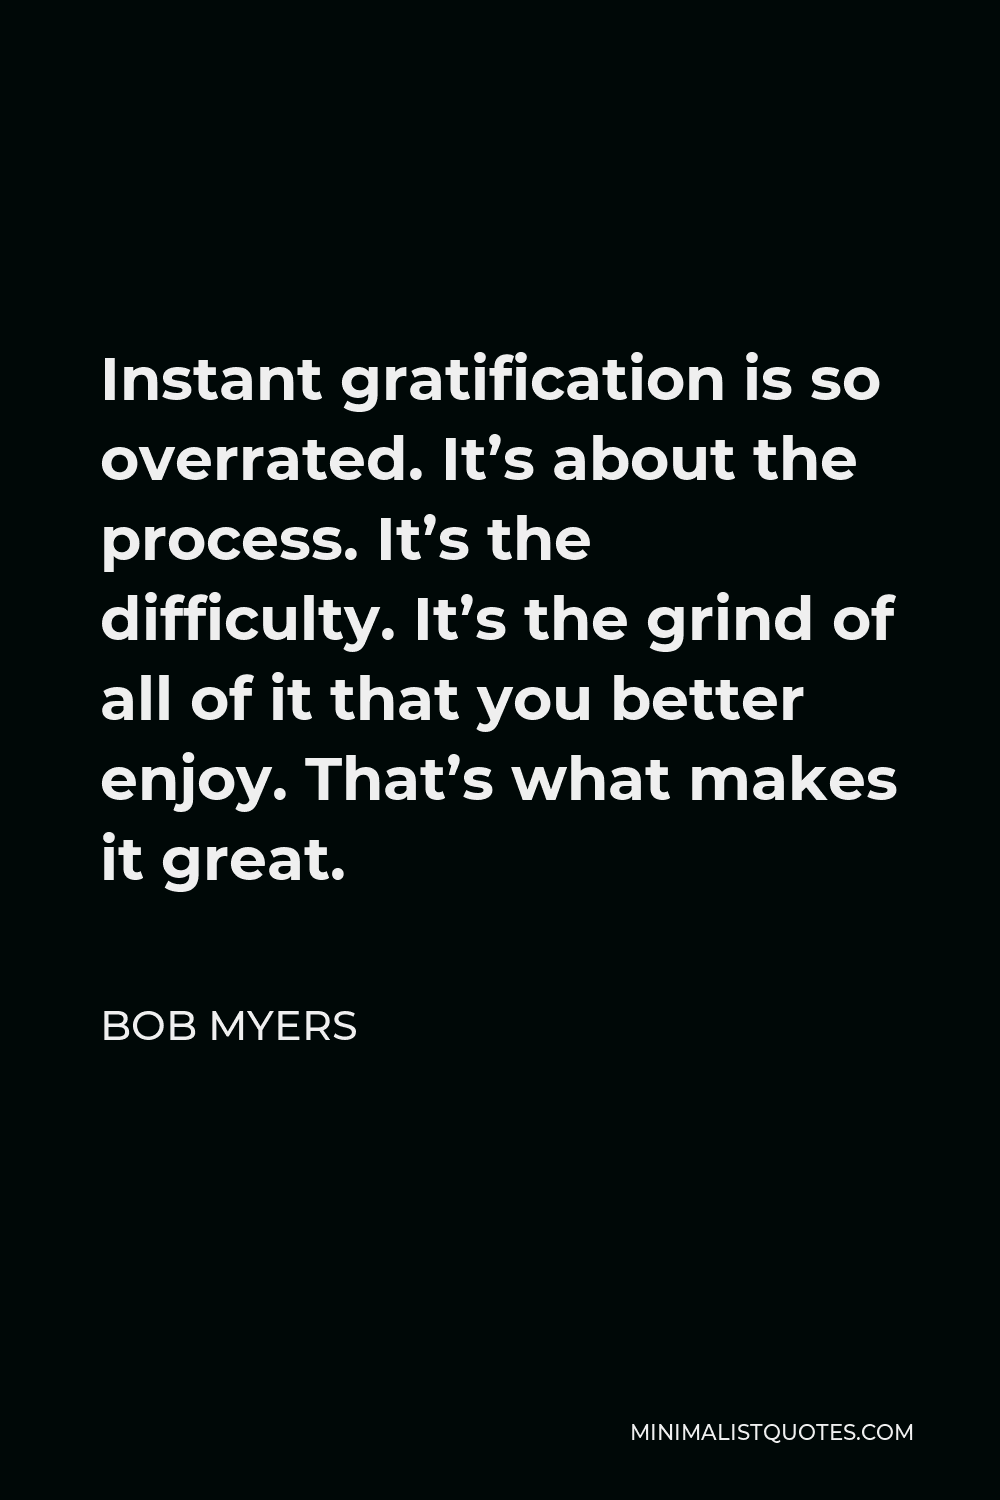 Bob Myers Quote - Instant gratification is so overrated. It’s about the process. It’s the difficulty. It’s the grind of all of it that you better enjoy. That’s what makes it great.